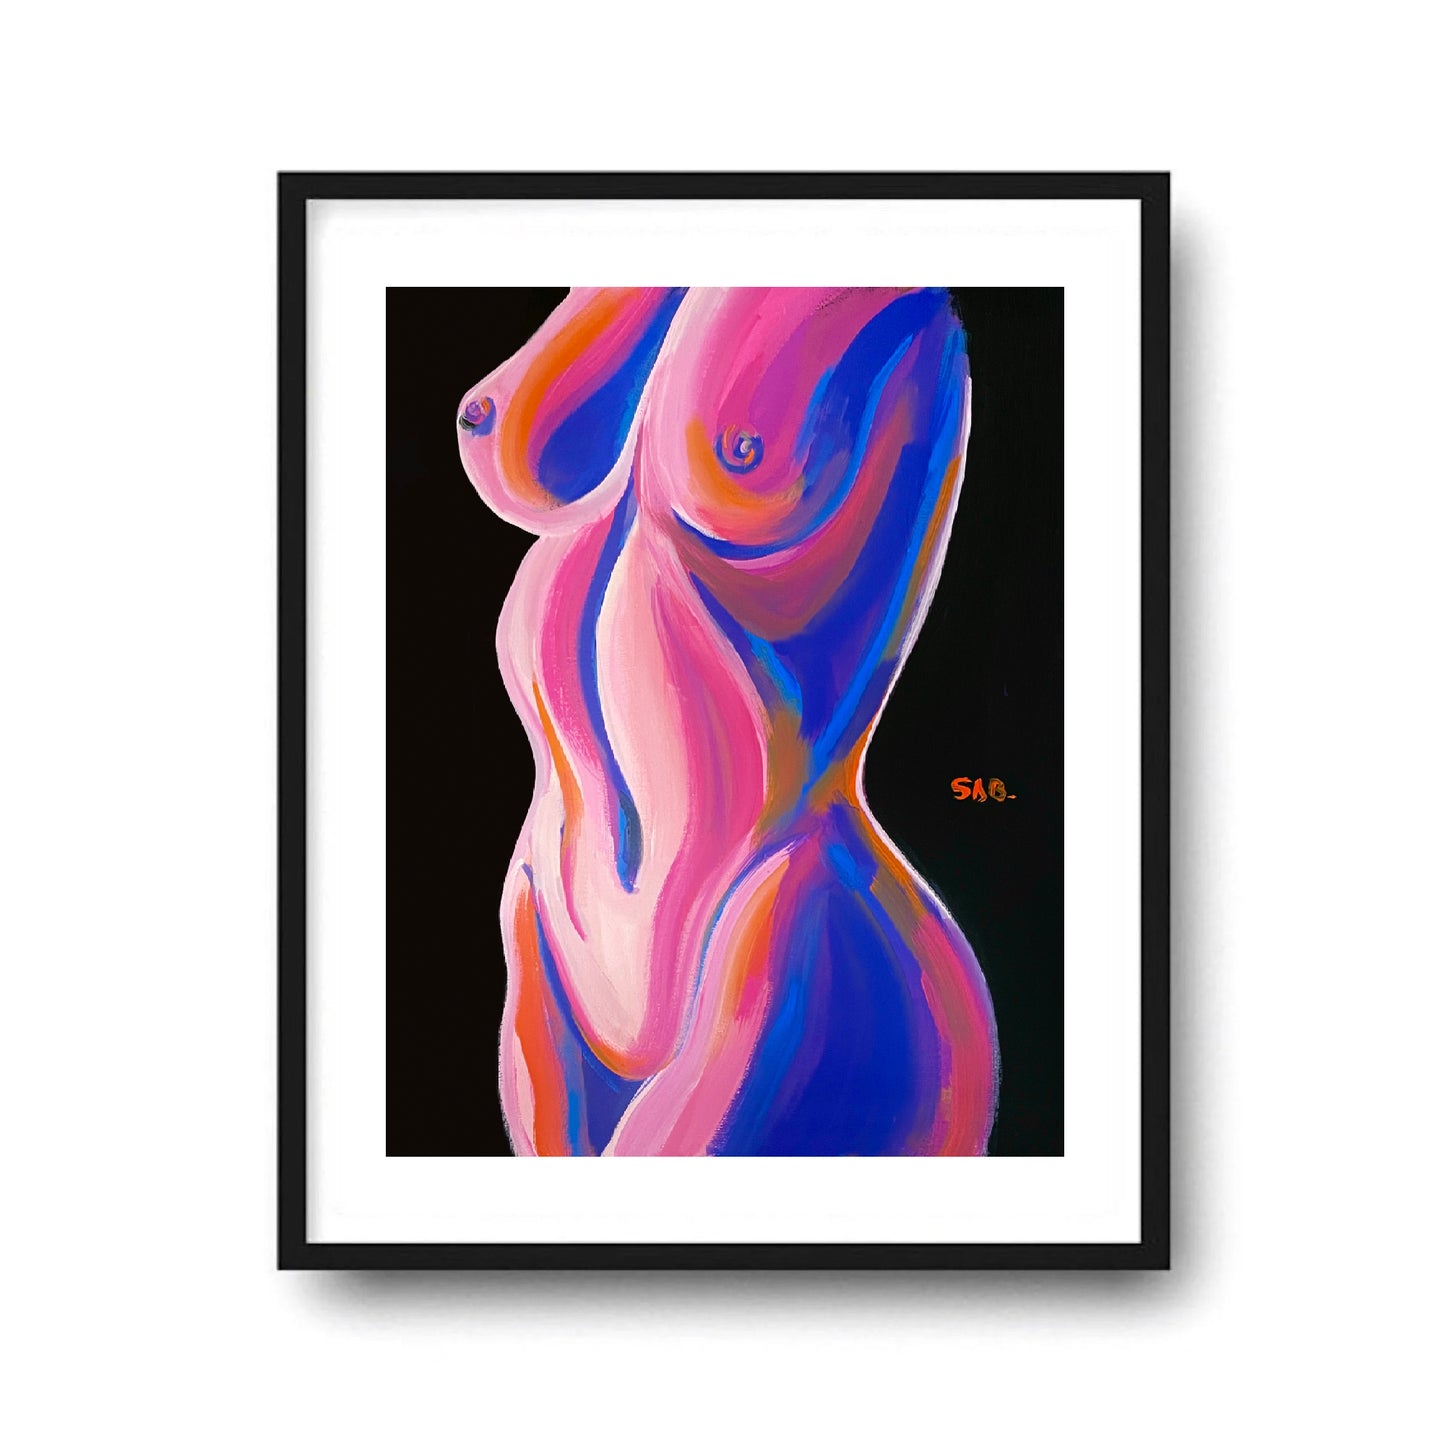 “L” abstract figurative female body painting print